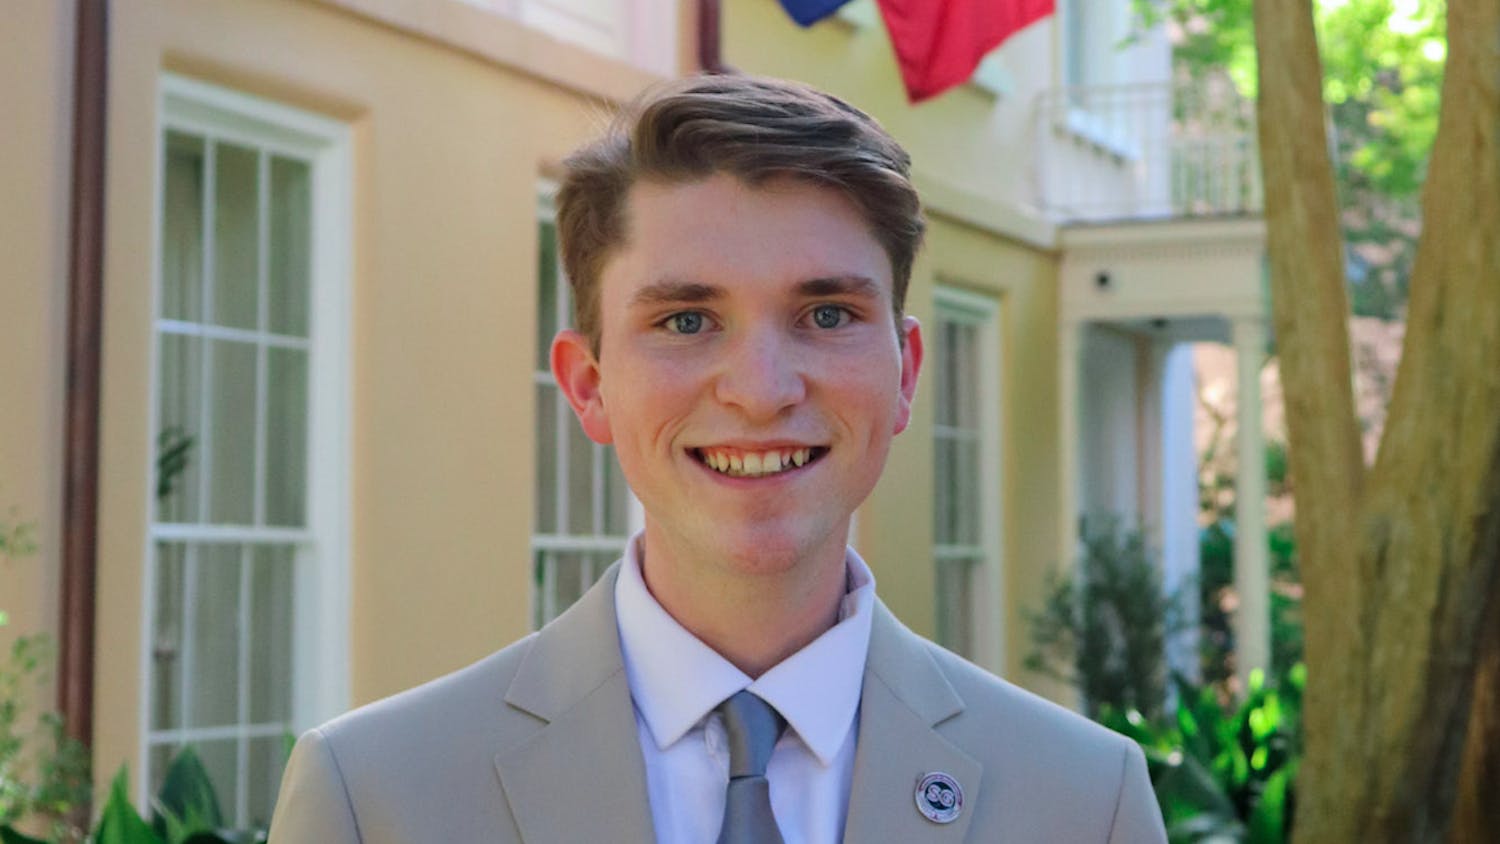 FILE— Noah Glasgow, the lone candidate running to become the next Speaker of the Student Senate, poses for a photo. Students can vote for candidates from Feb. 22 at 9 a.m. to Feb. 23 at 5 p.m. Ballots will be available online.